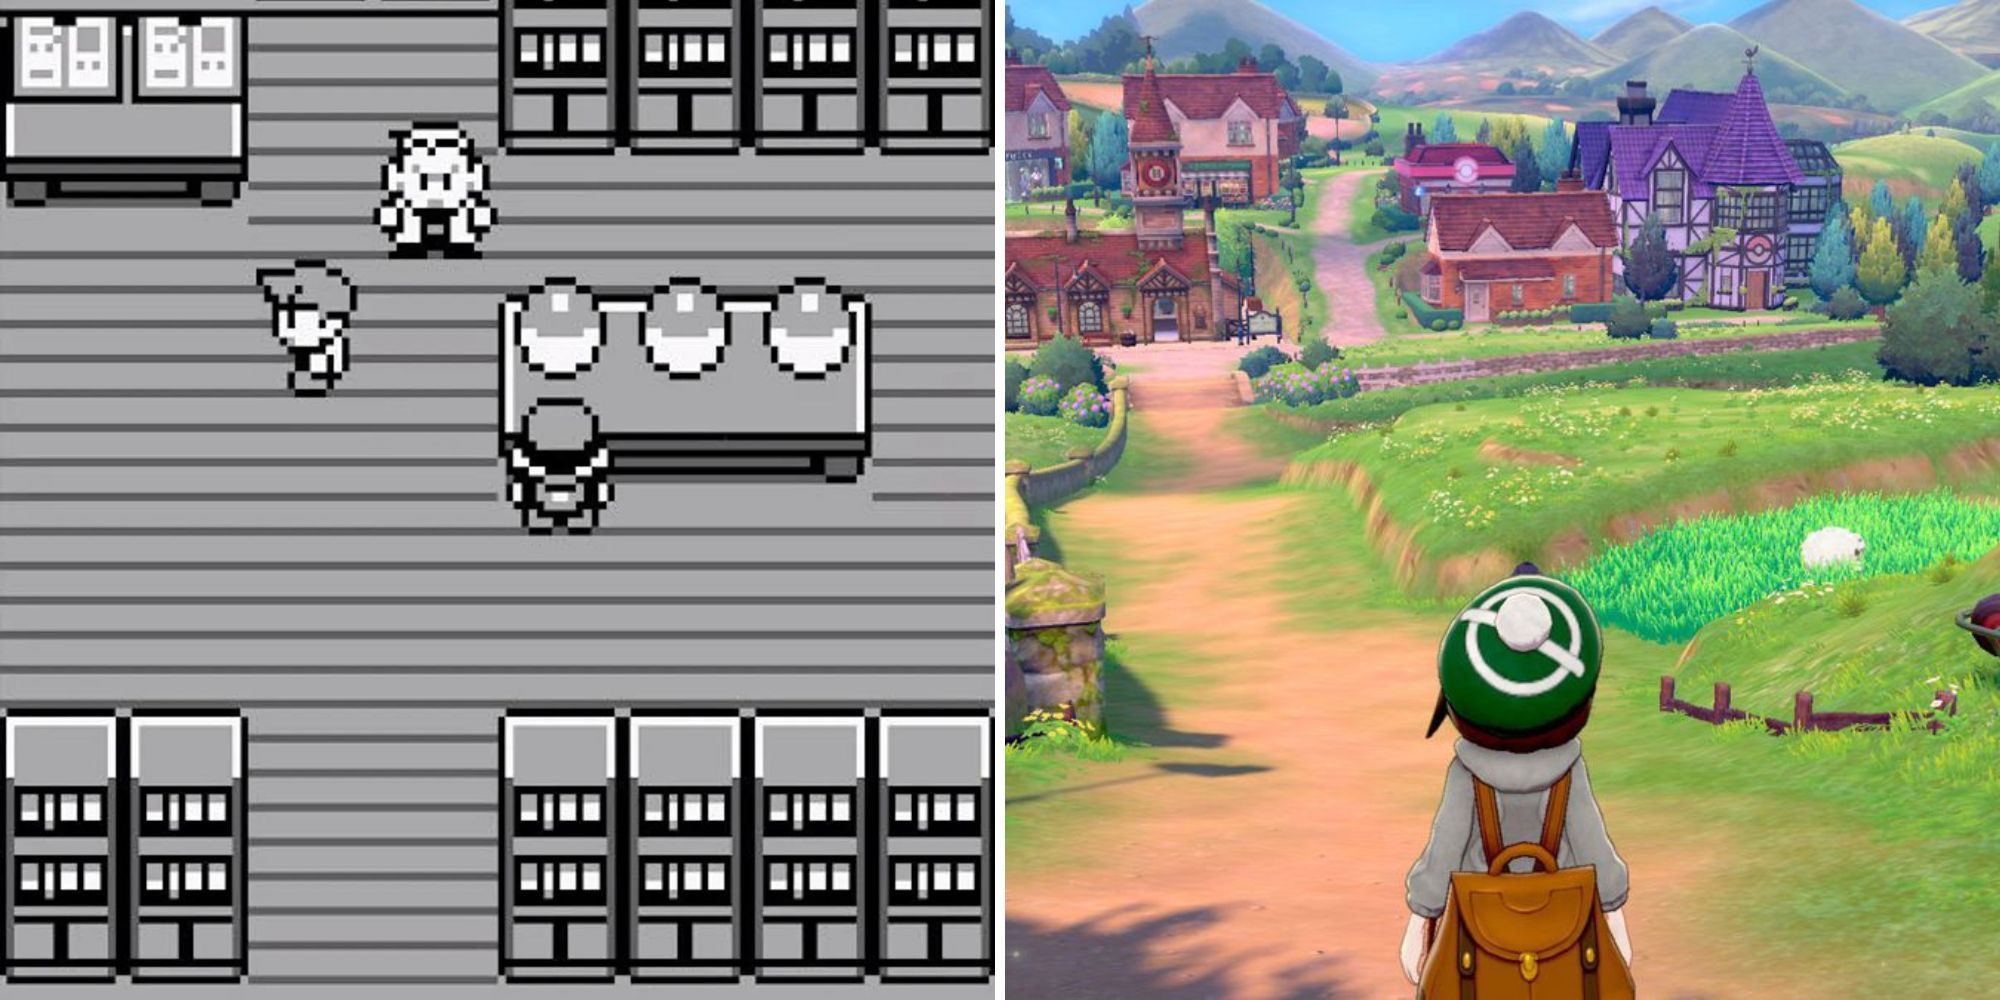 Two images, the first shows the original Pokemon game and the second shows the player in-game from Pokemon Sword and Shield